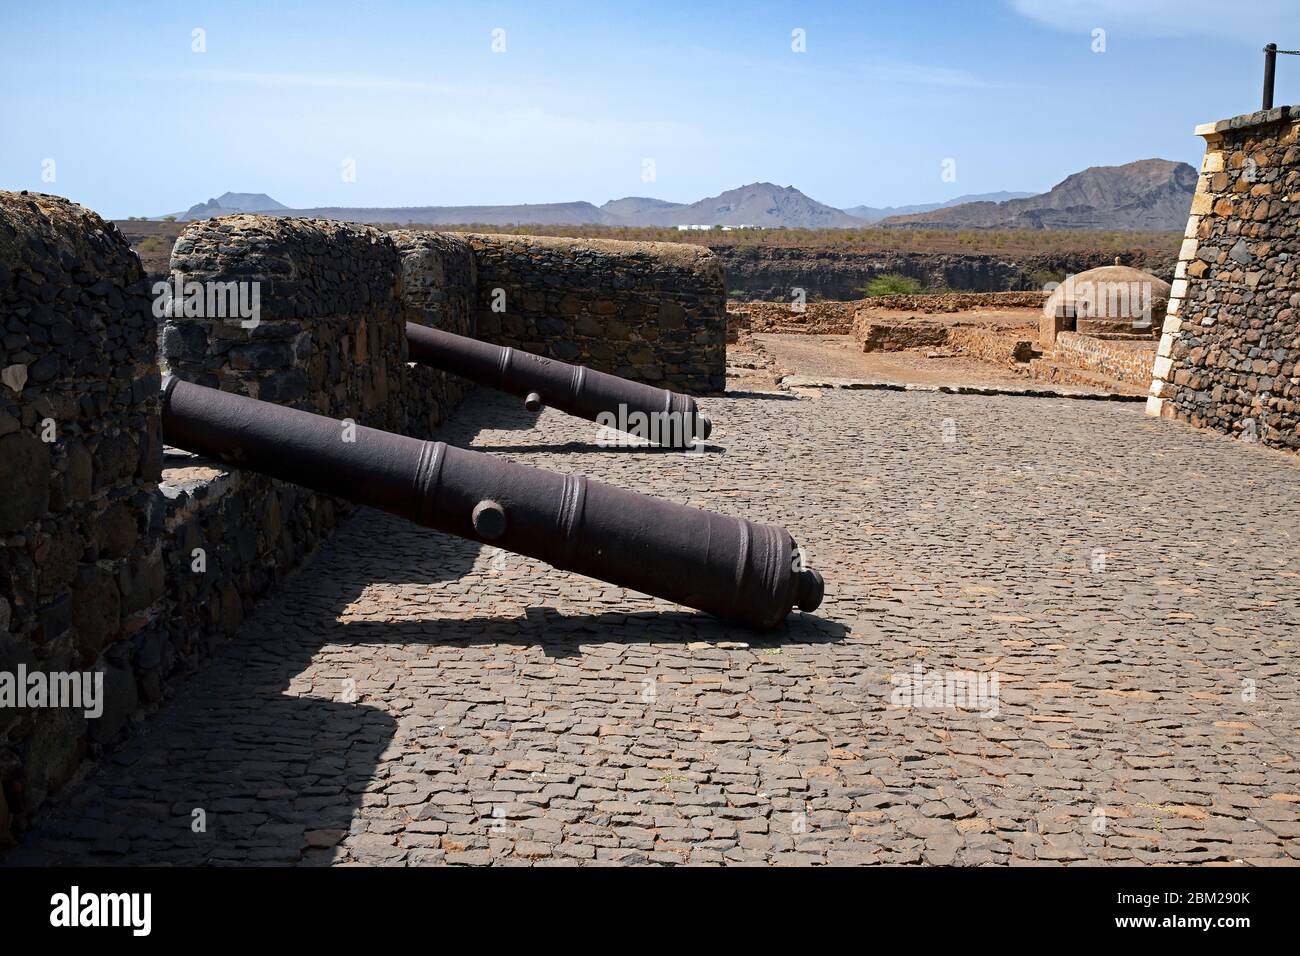 Old cannons and cistern in 16th century fortress Forte Real de São Filipe looking over the city Cidade Velha on the island Santiago, Cape Verde Stock Photo